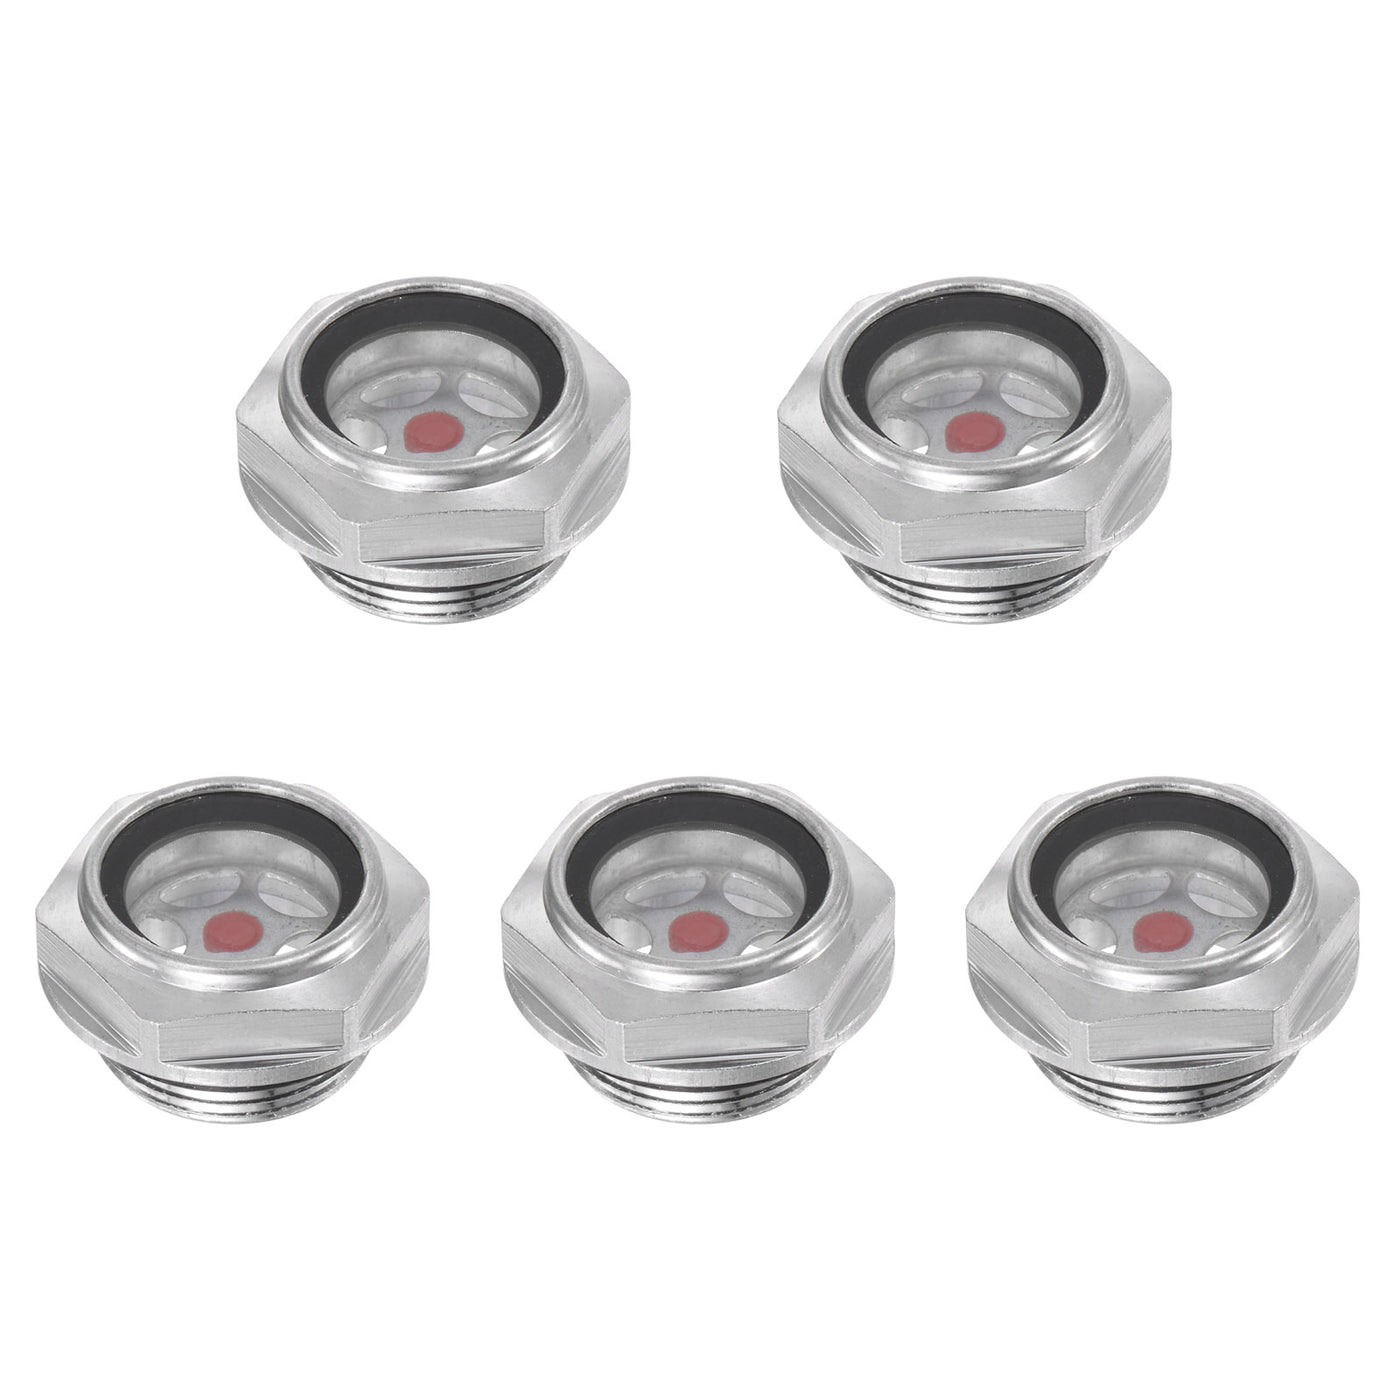 uxcell Uxcell Compressor Oil Level Gauge Sight Glass M27x1.5mm Male Thread 20mm Height 5Pcs